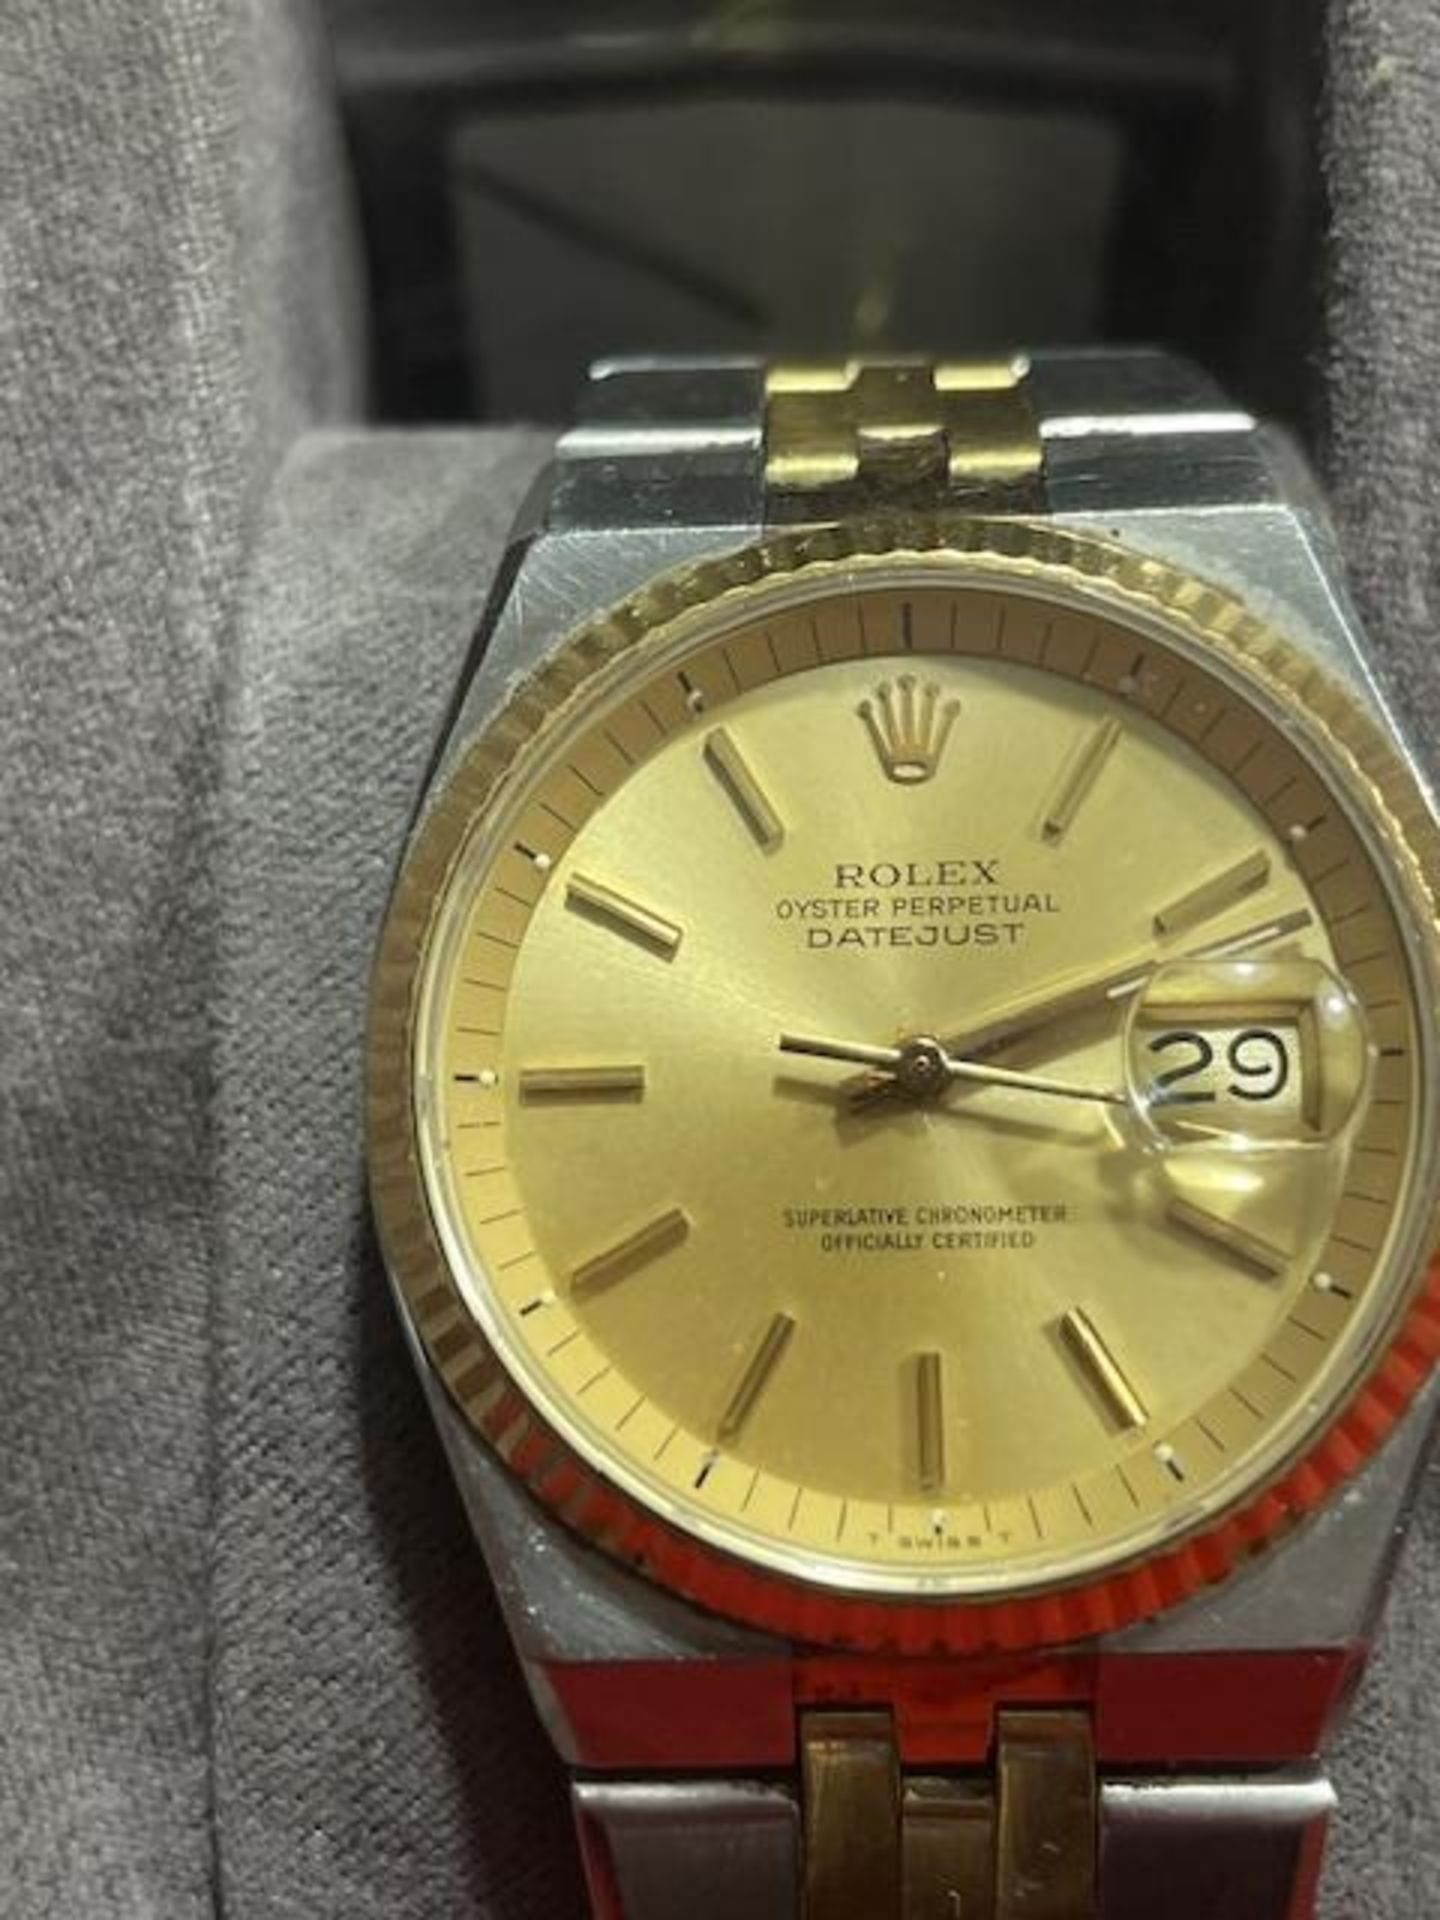 Rolex Oyster Purpetual DATEJUST Mens Watch - Image 8 of 15